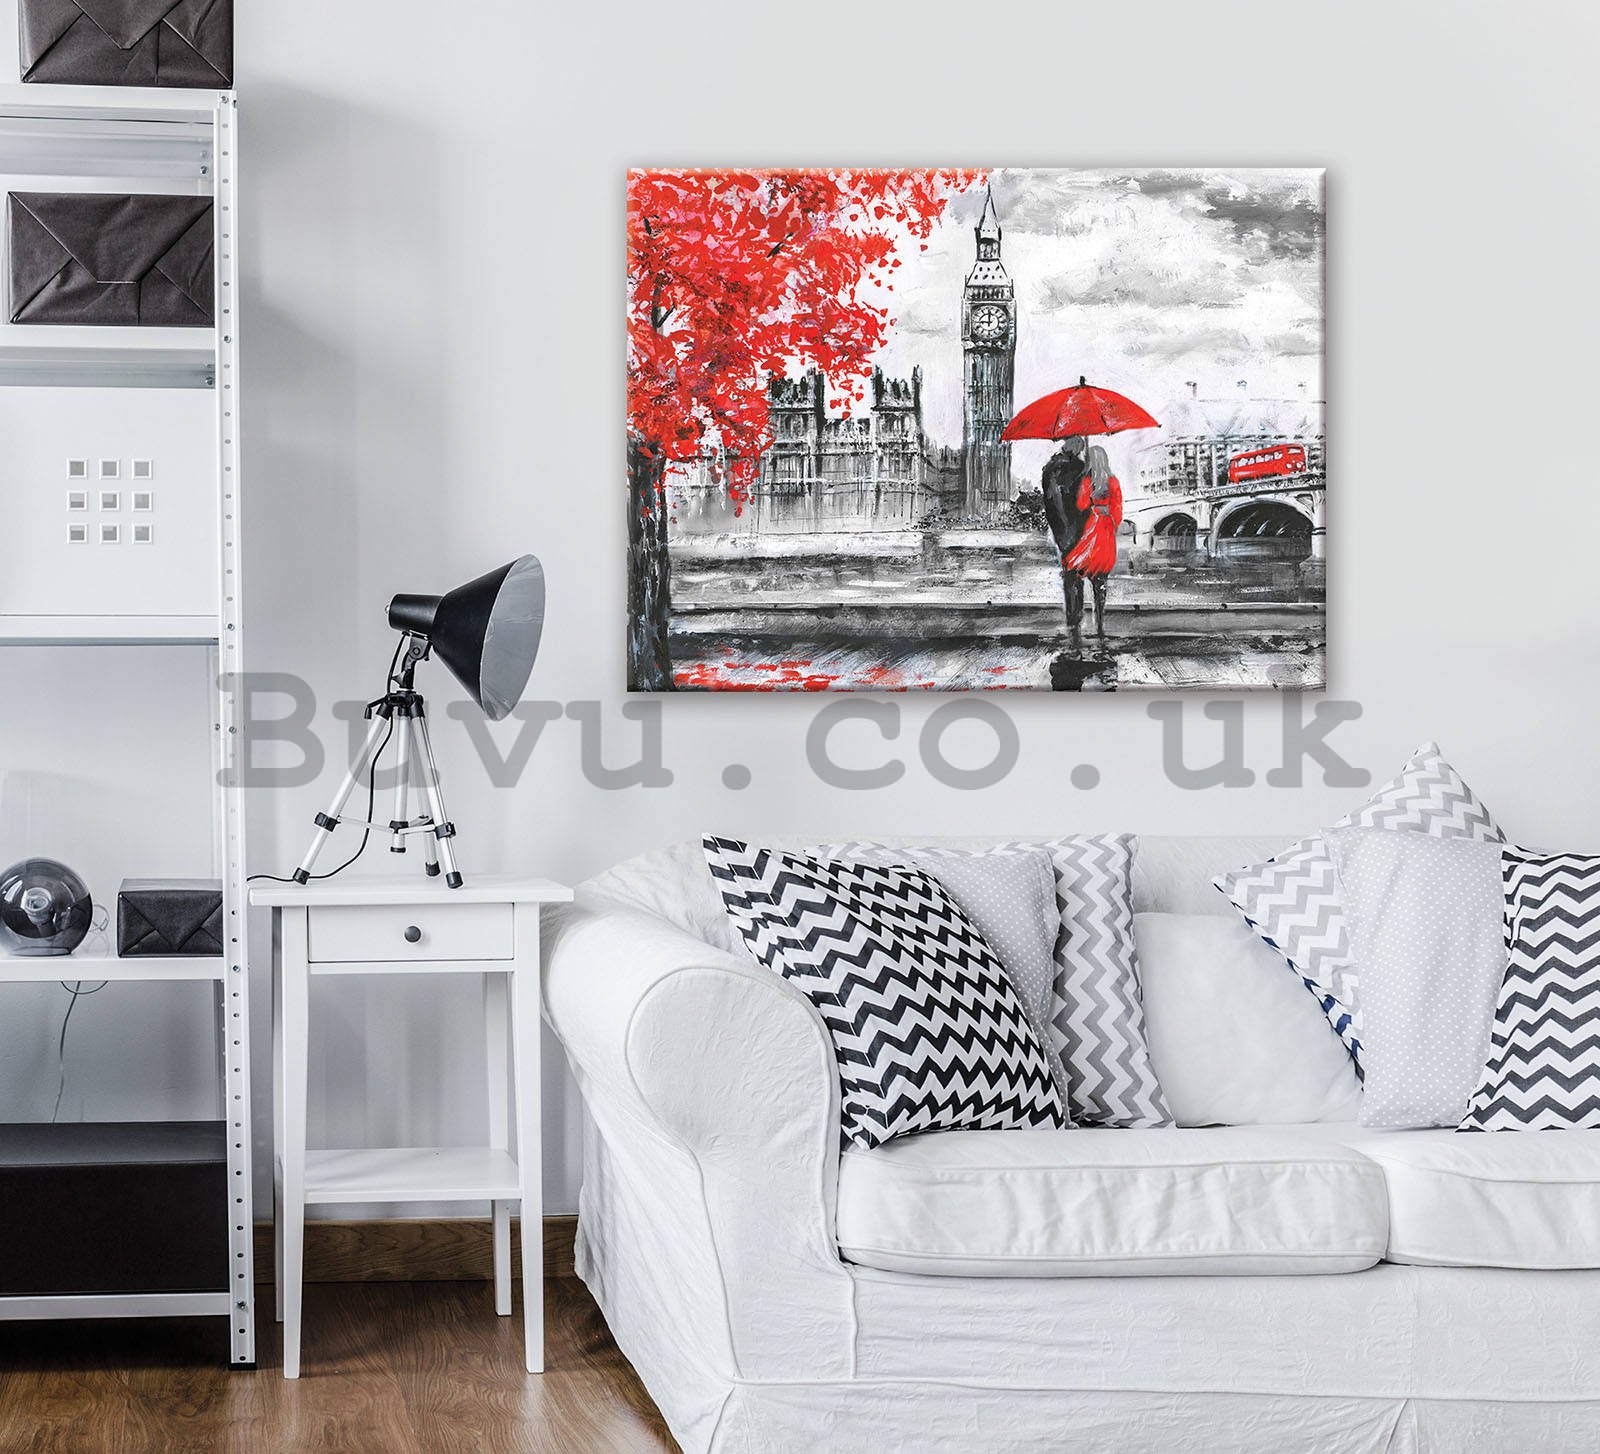 Painting on canvas: London (painted) - 80x60 cm